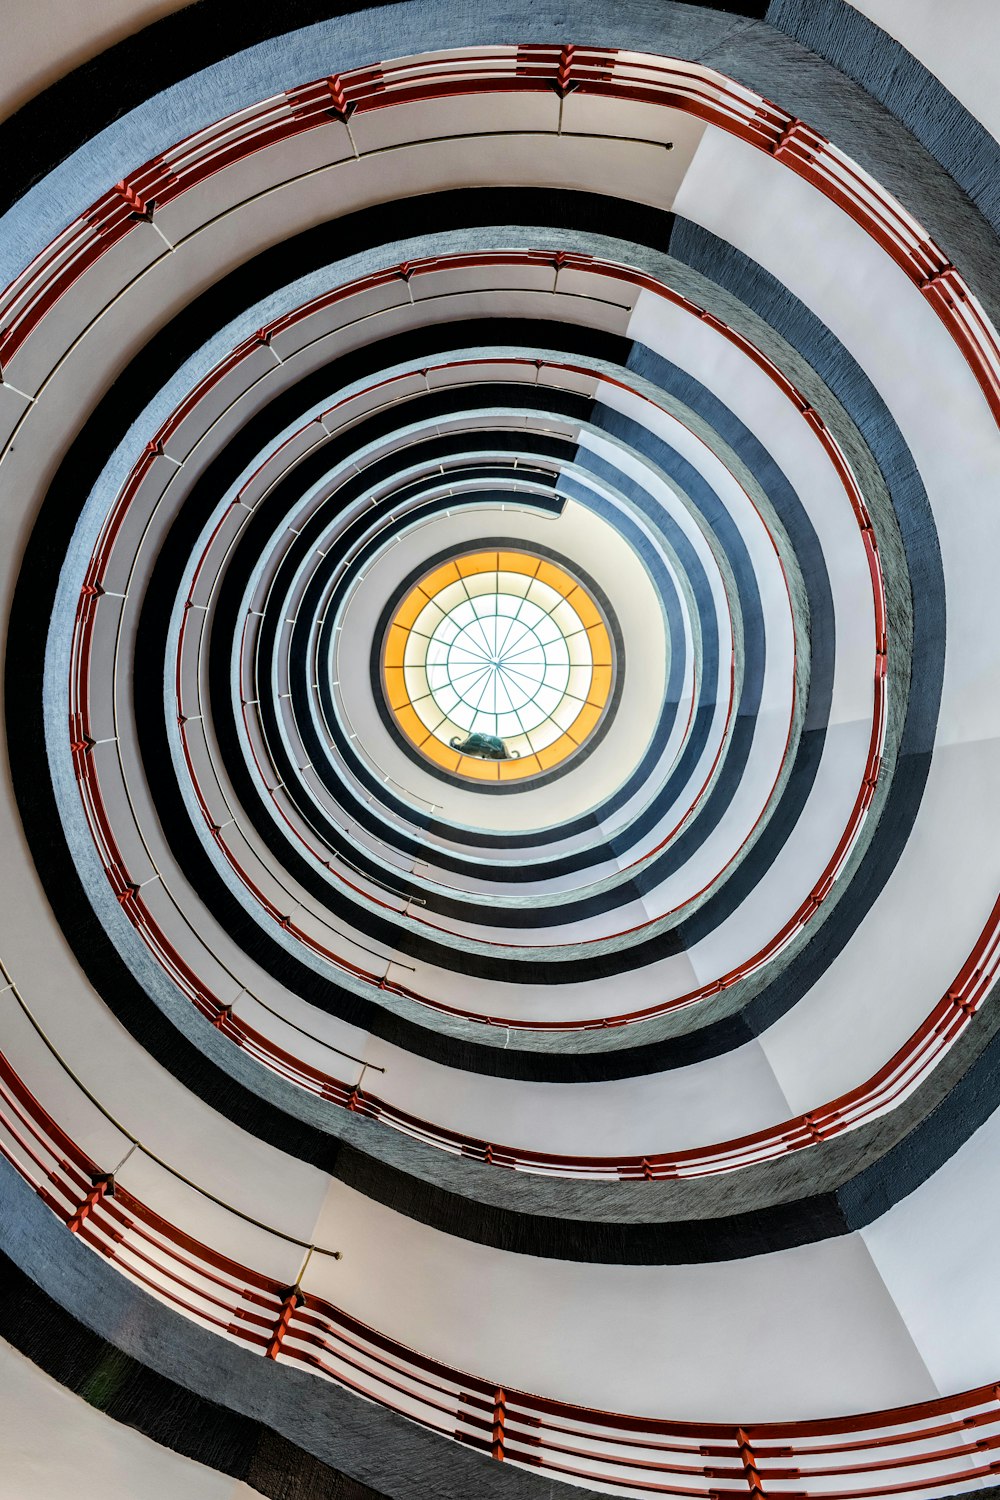 a spiral staircase with a circular window in the center